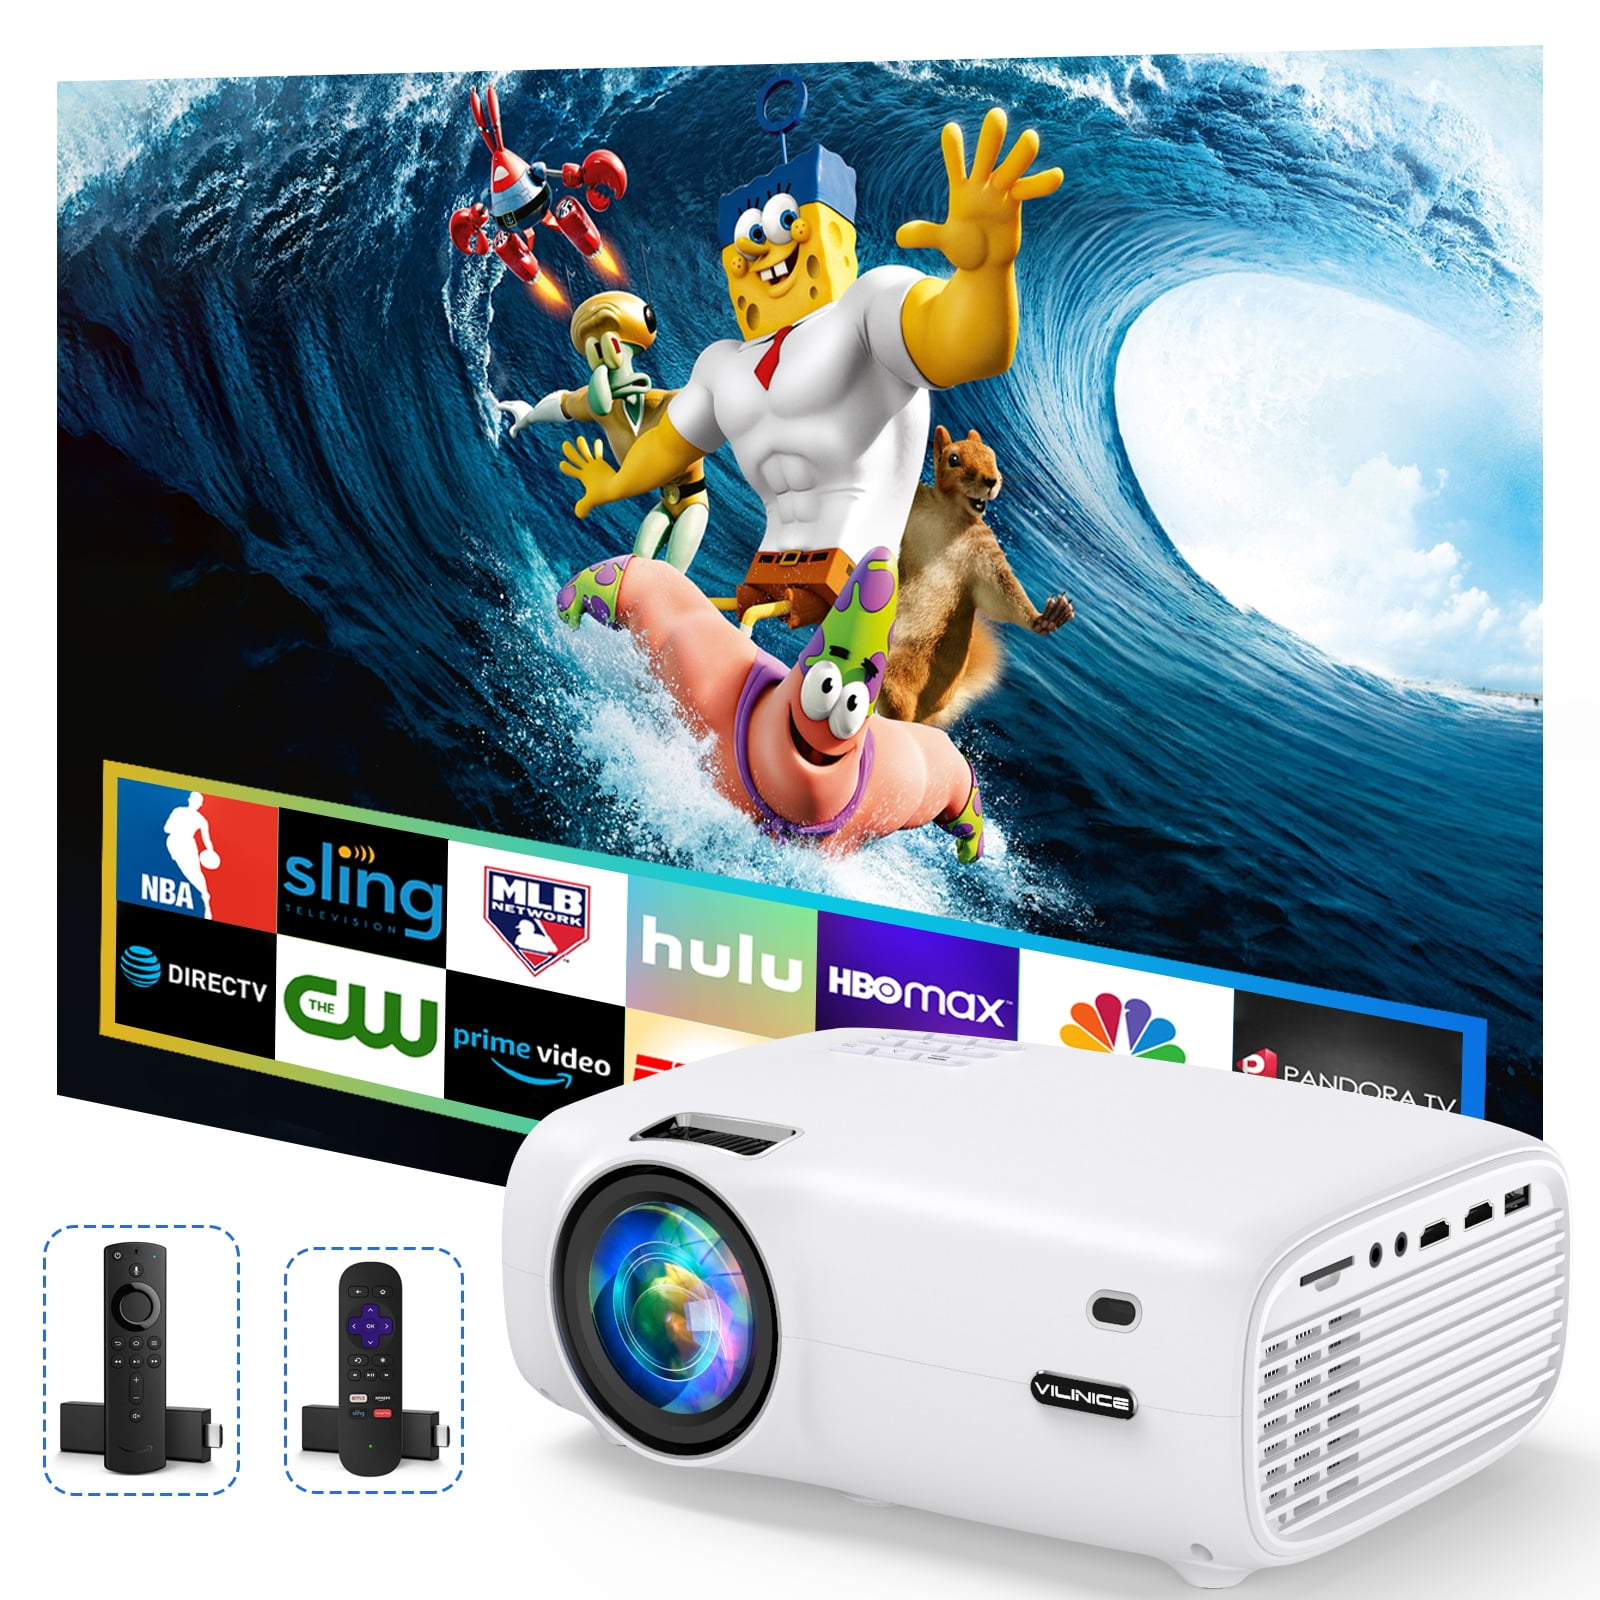 VILINICE Mini Projector, 6500L Movie Projector, 1080P and 240" LCD Display Supported, Home Theater Projector Compatible TV PS4, HDMI, USB, VGA - Walmart.com